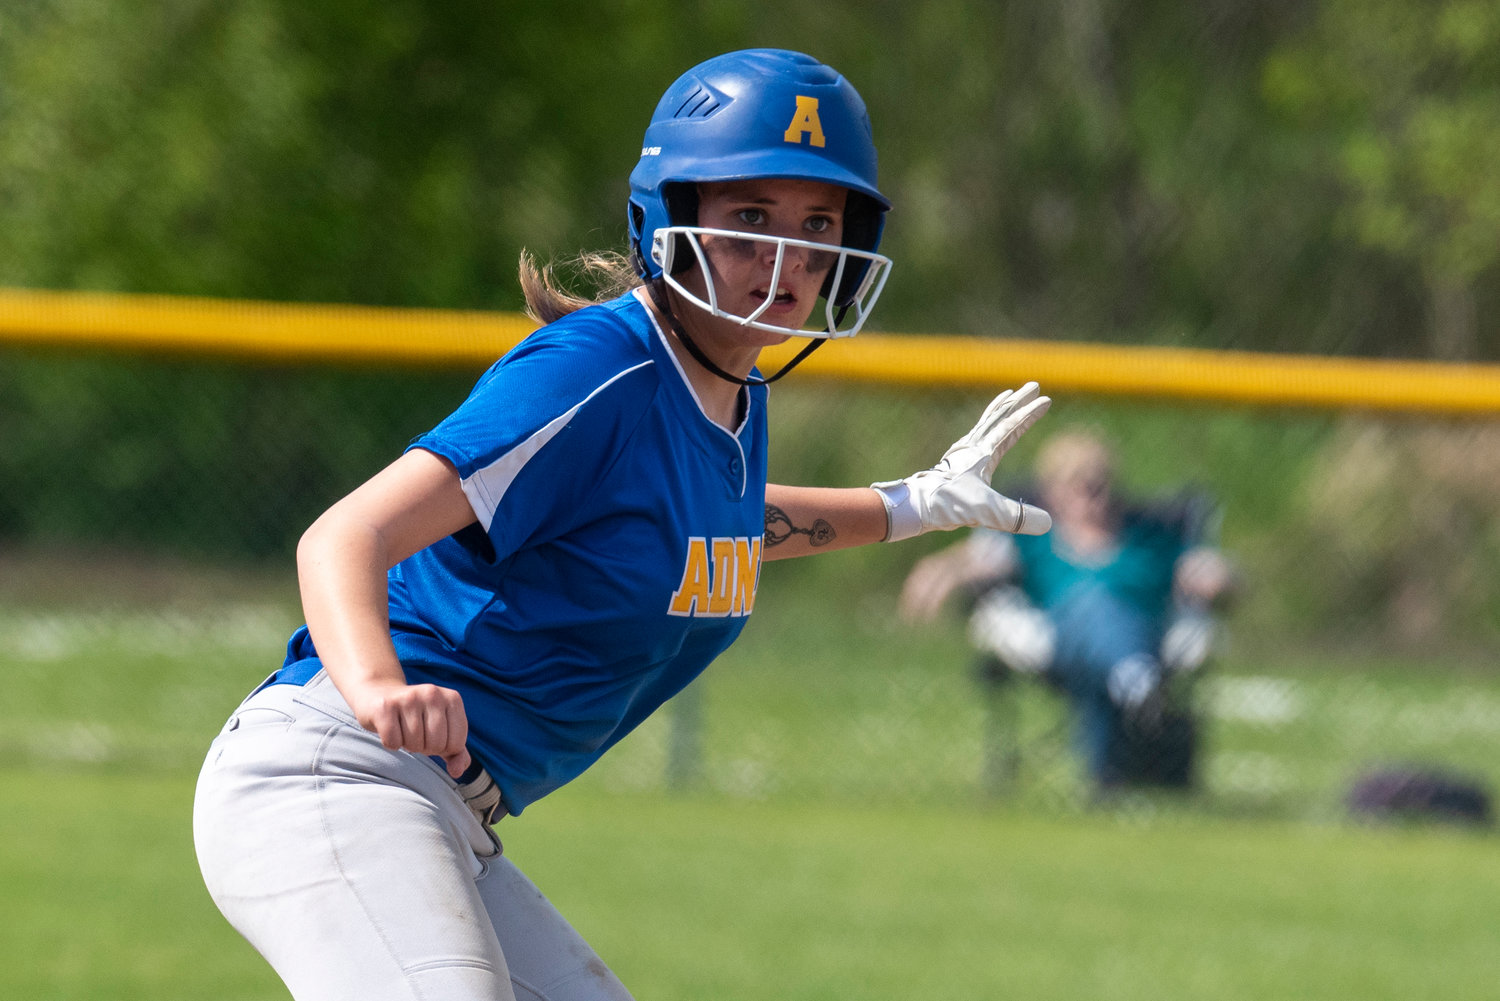 Adna's Gracie Beaulieu watches down the third base line toward home plate during a home game on May 4.